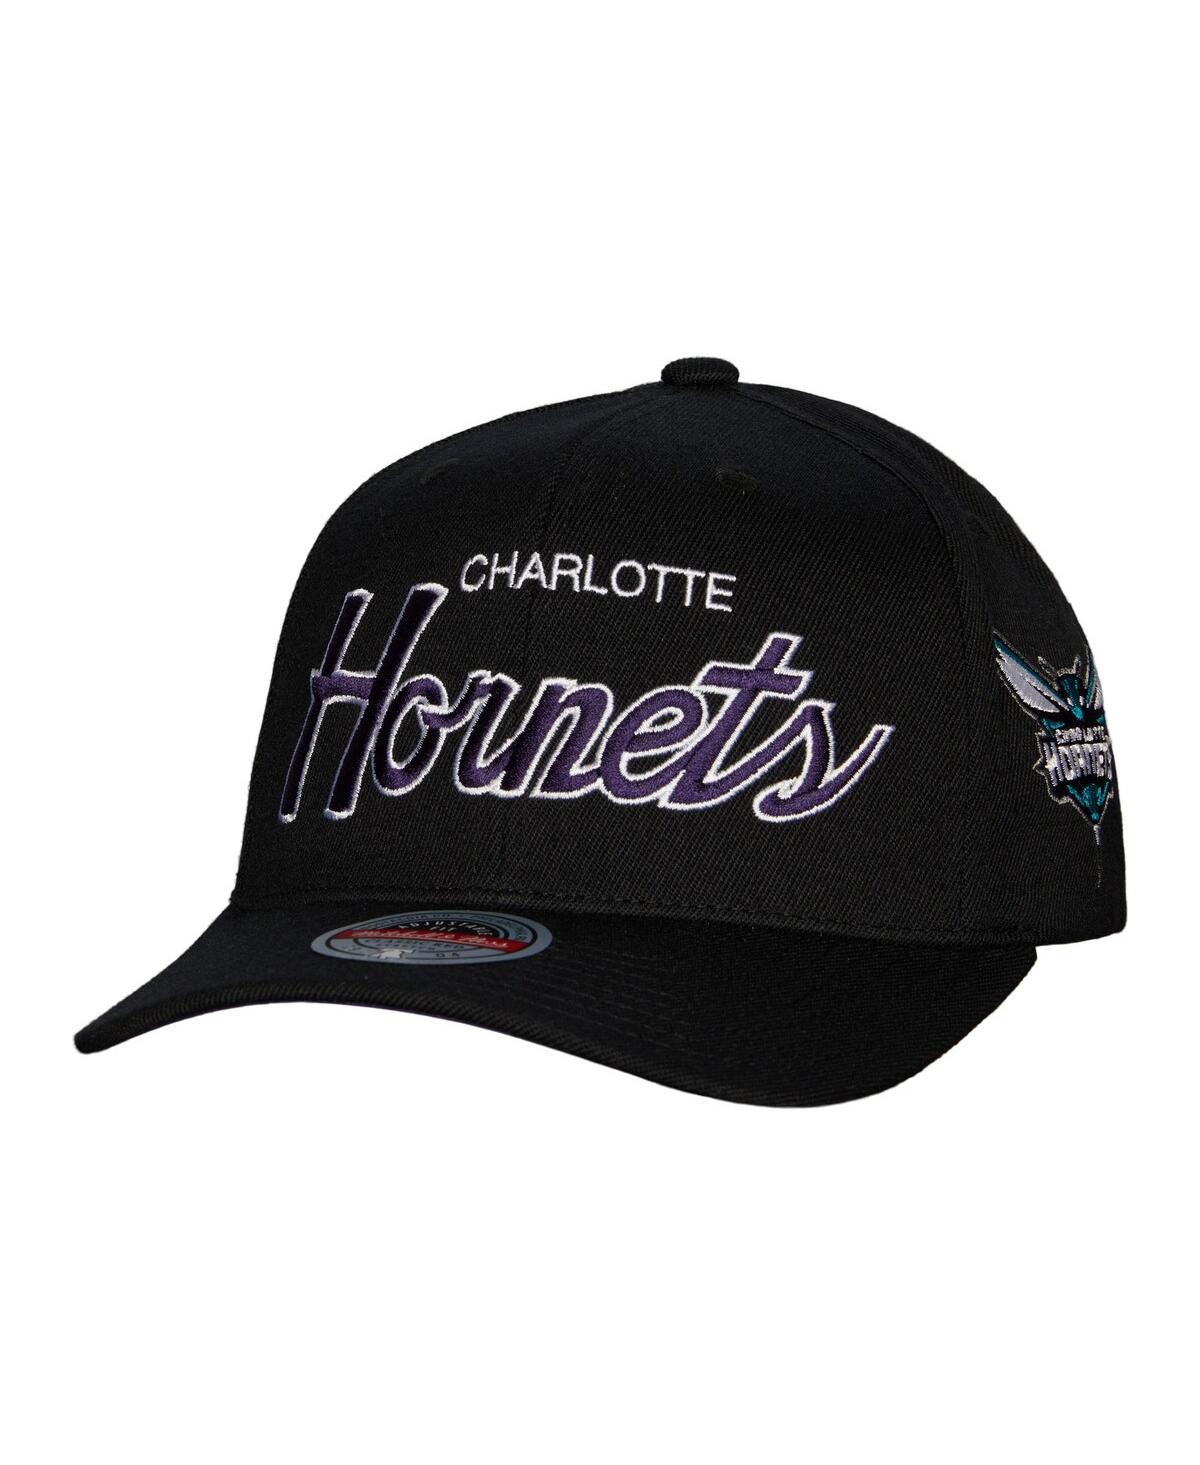 Mitchell & Ness Charlotte Hornets Team Ground Snapback Hat Teal